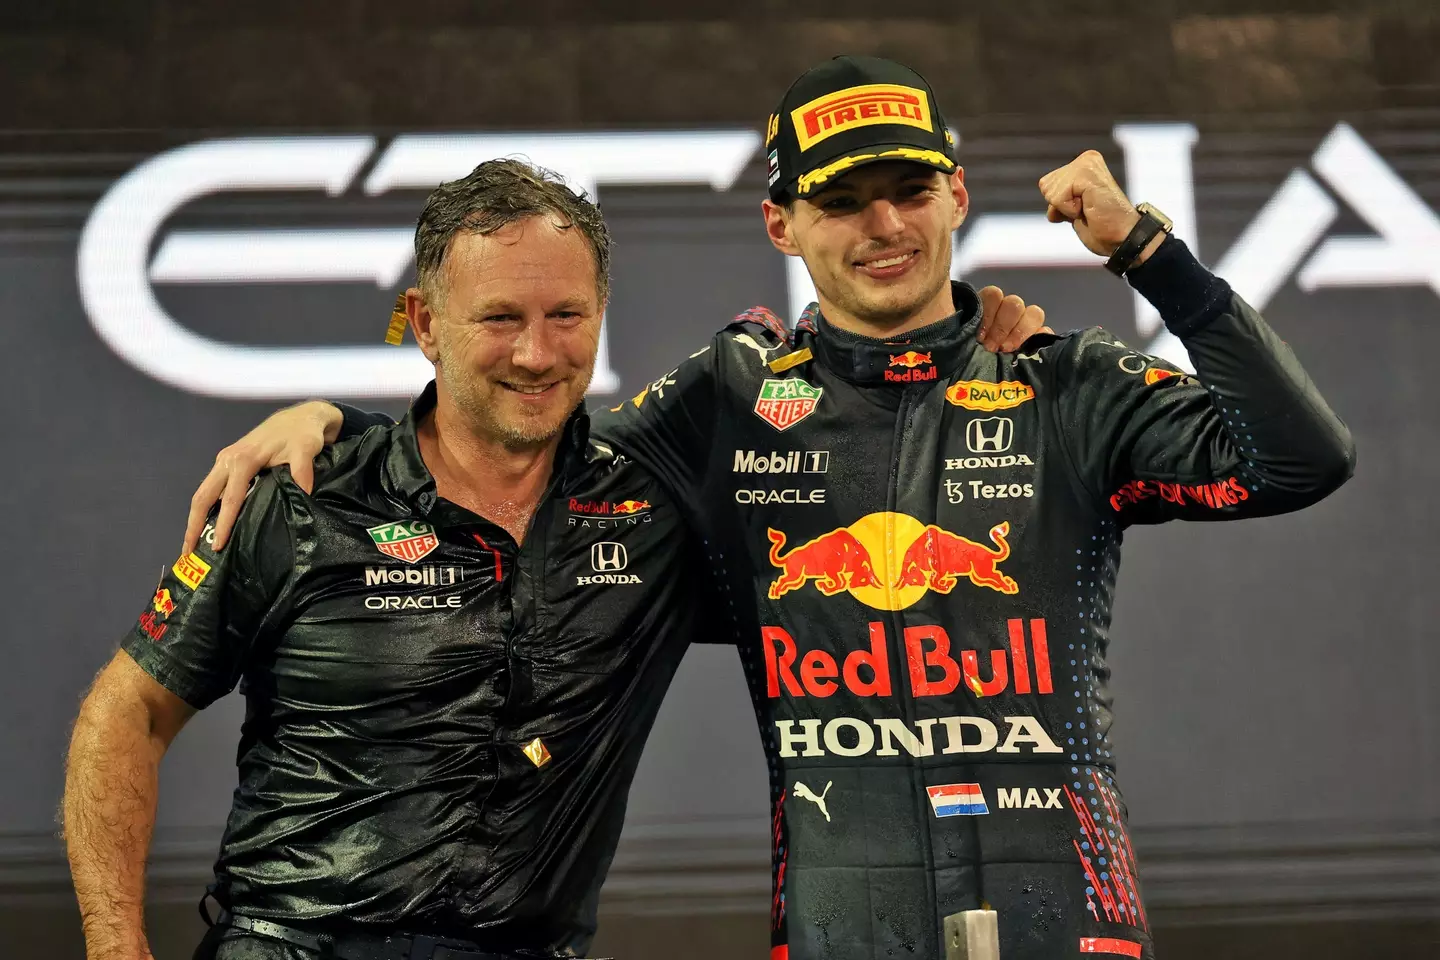 Max Verstappen pipped Lewis Hamilton to the title this year.